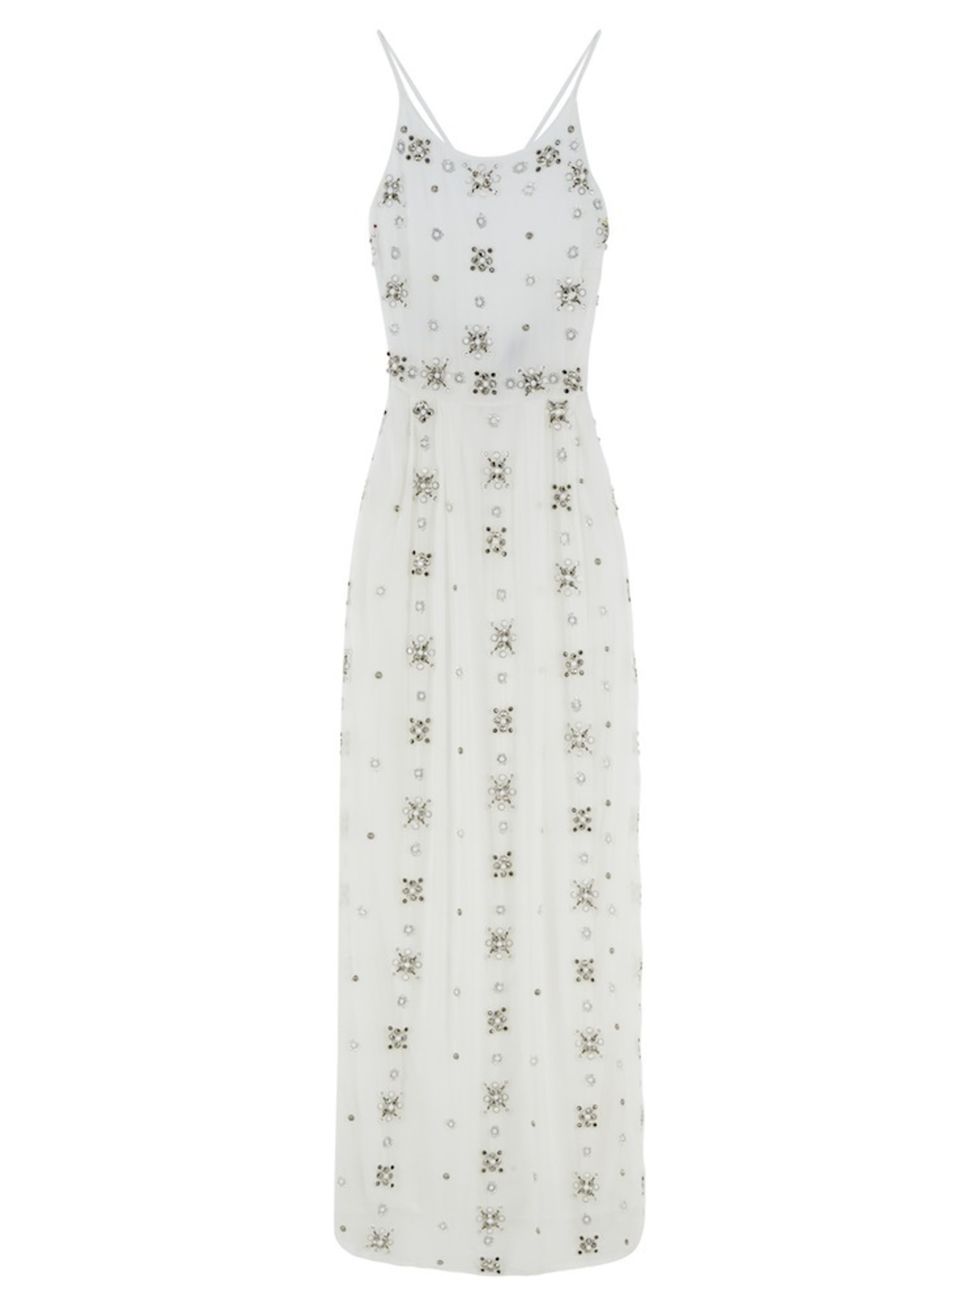 <p>All over embellished cami maxi, £150, <a href="http://xhttp://www.asos.com/ASOS/ASOS-BRIDAL-All-Over-Embellished-Cami-Maxi-Dress/Prod/pgeproduct.aspx?iid=5992813&cid=2623&sh=0&pge=0&pgesize=36&sort=-1&clr=White&totalstyles=398&gridsize=3">available now